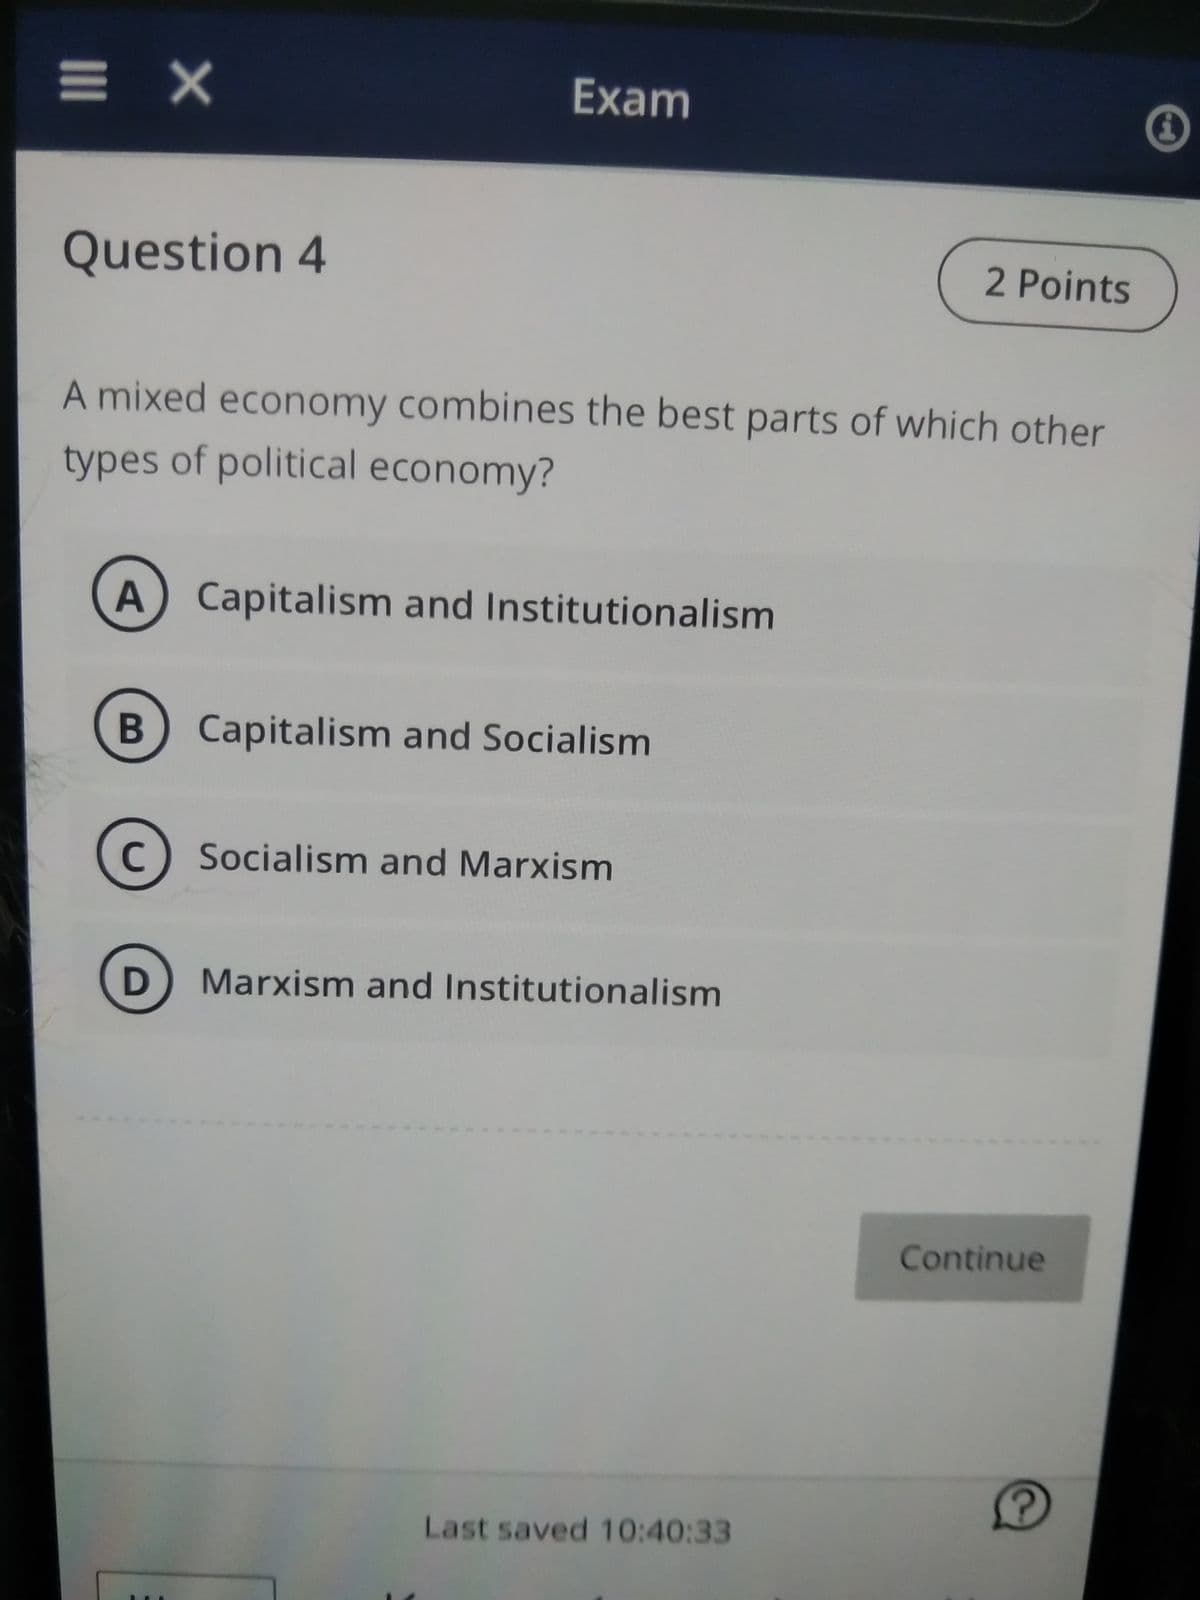 = X
Question 4
Exam
A mixed economy combines the best parts of which other
types of political economy?
A) Capitalism and Institutionalism
B Capitalism and Socialism
C
D
Socialism and Marxism
Marxism and Institutionalism
2 Points
Last saved 10:40:33
Continue
Ⓡ
i